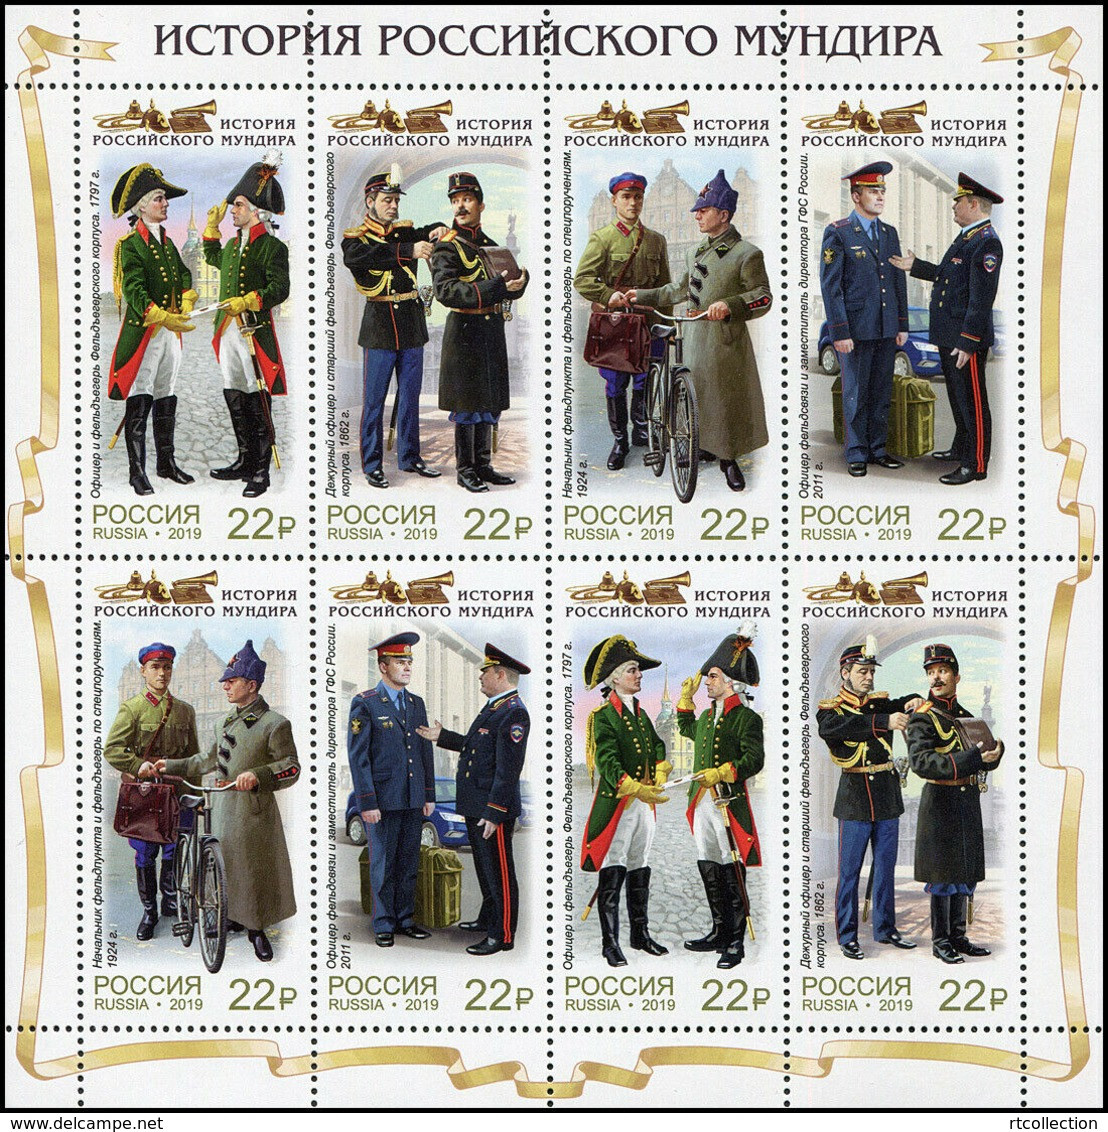 Russia 2019 M/S History Russian Uniform Jacket Diplomatic Customs Service Cloth Cultures Bycycle Military Stamps MNH - Fogli Completi